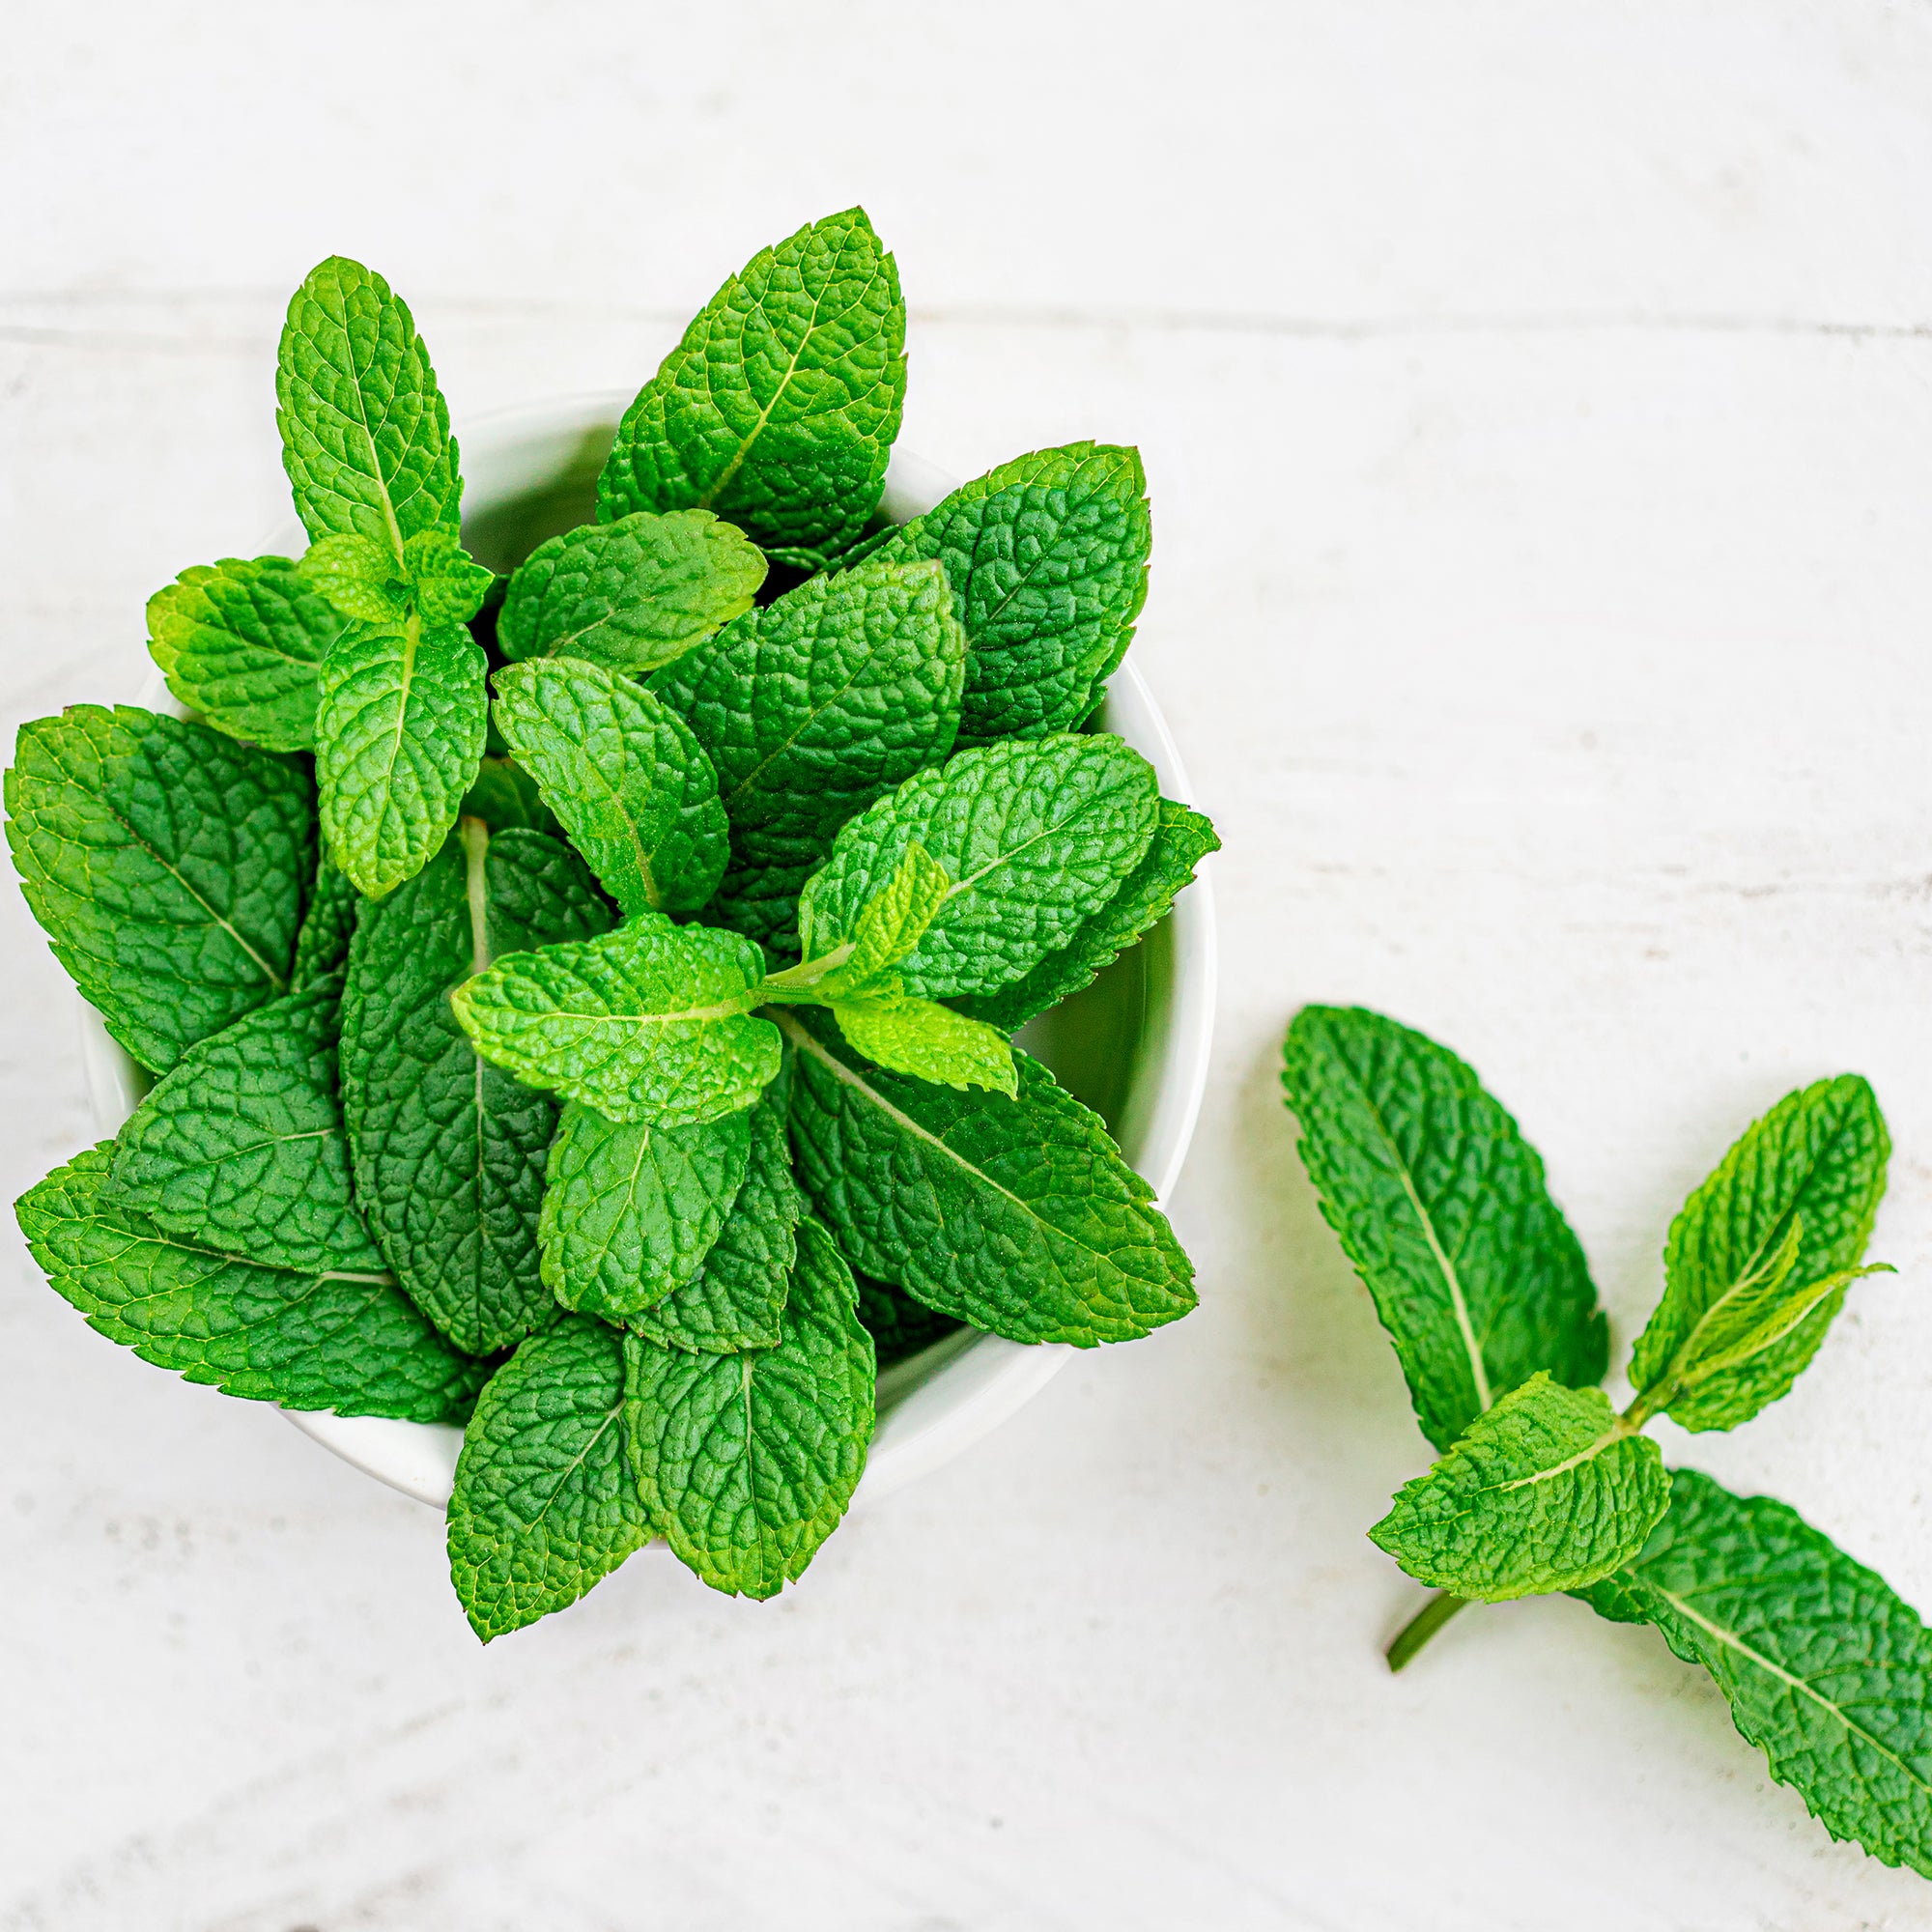 Mind Blowing Mint Skin Benefits  iHeart Nature